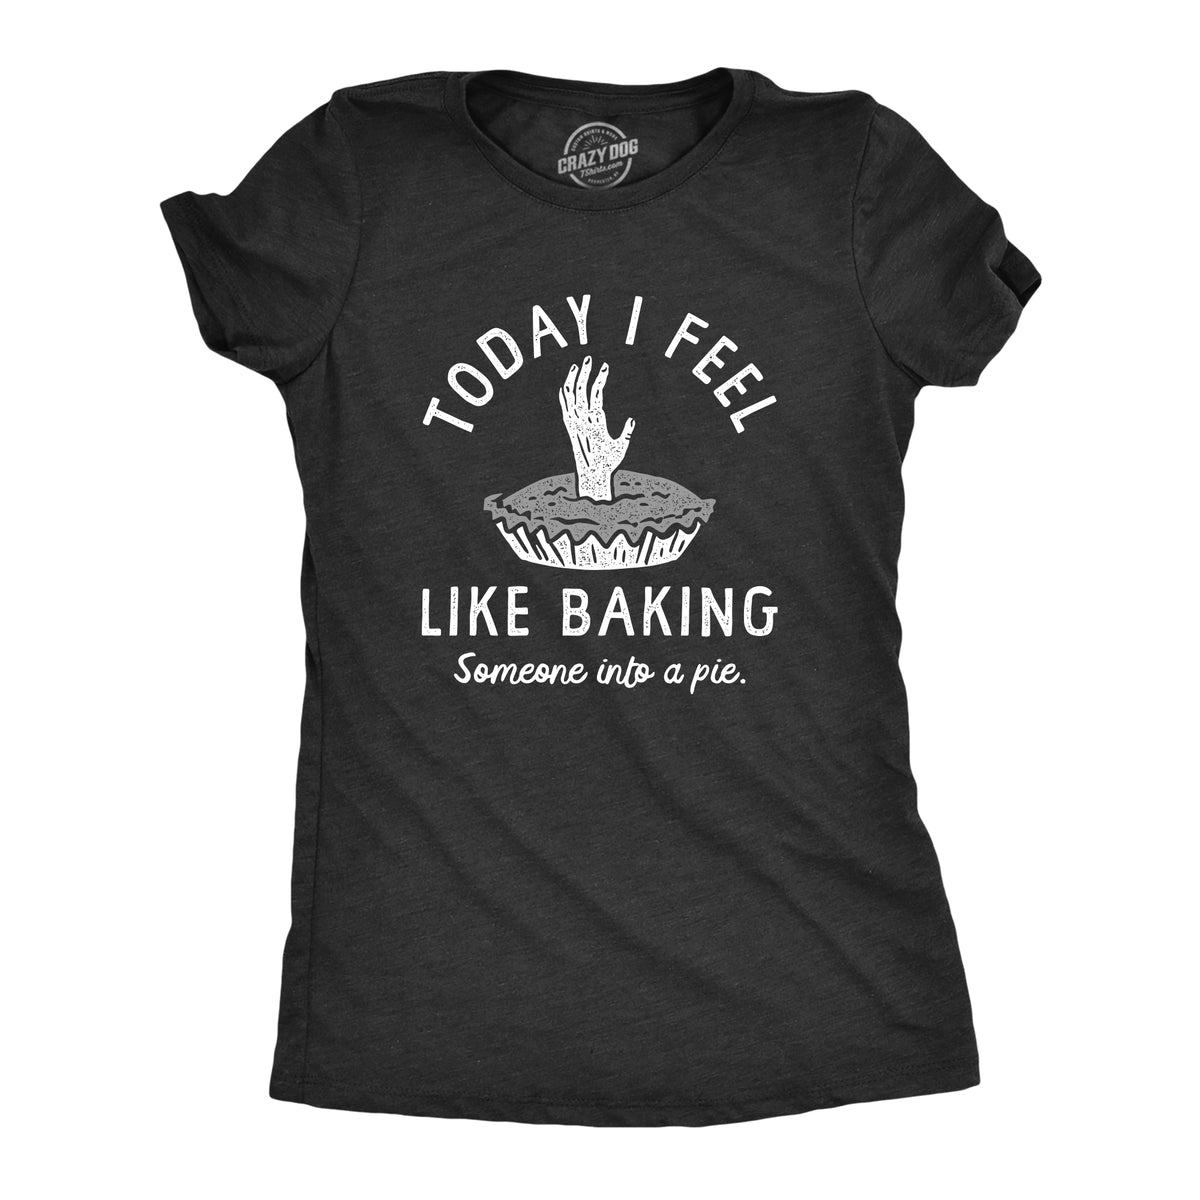 Funny Heather Black Today I Feel Like Baking Someone Into A Pie Womens T Shirt Nerdy food Tee